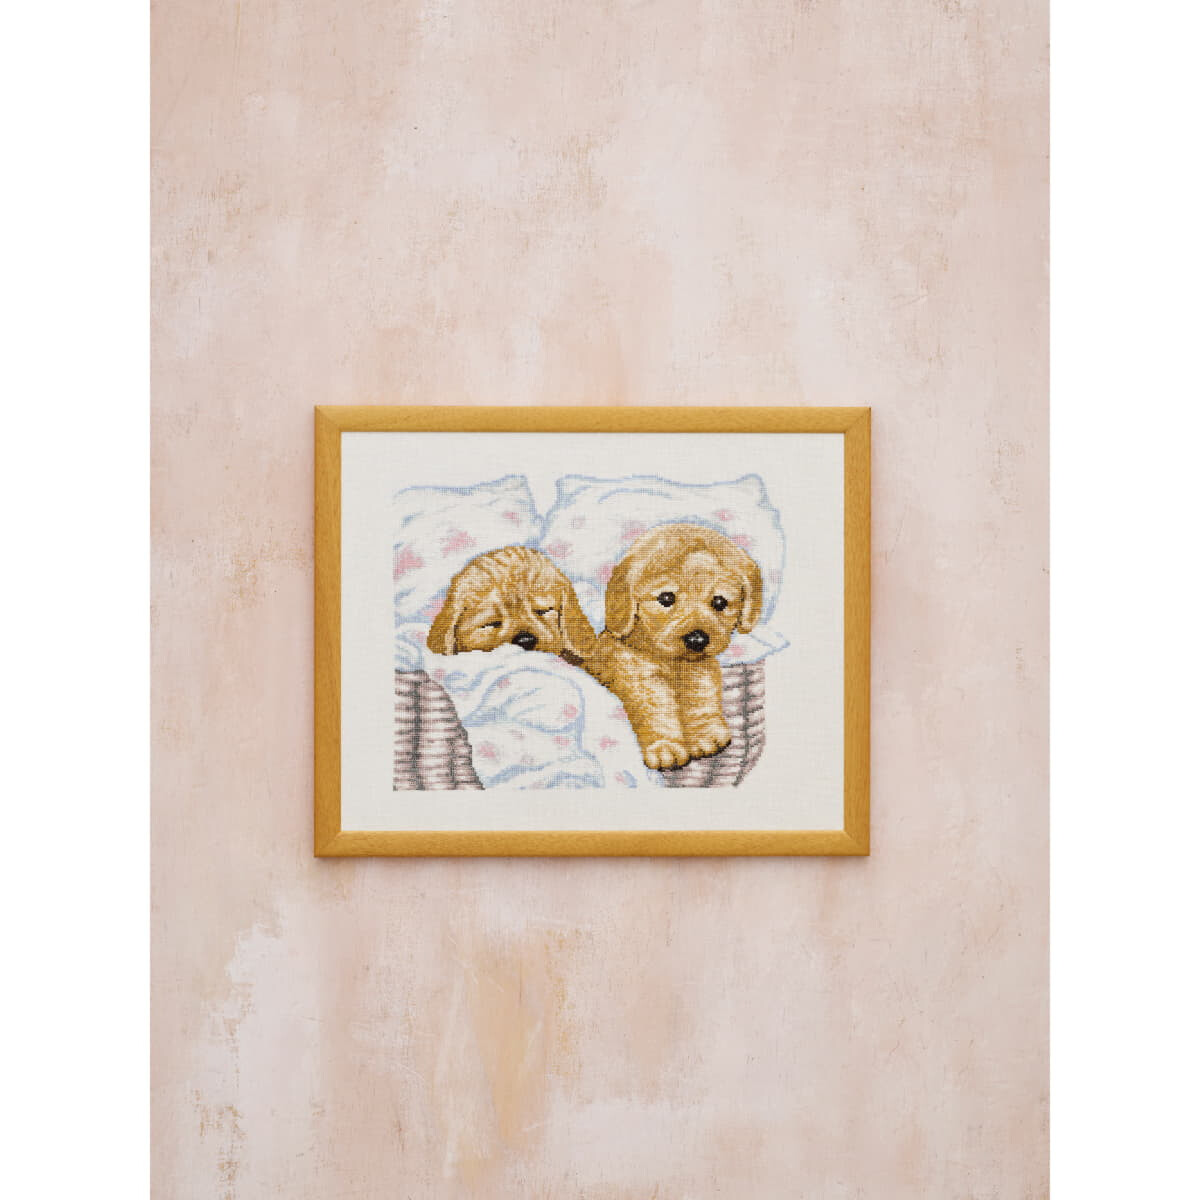 Permin counted cross stitch kit "Puppies",...